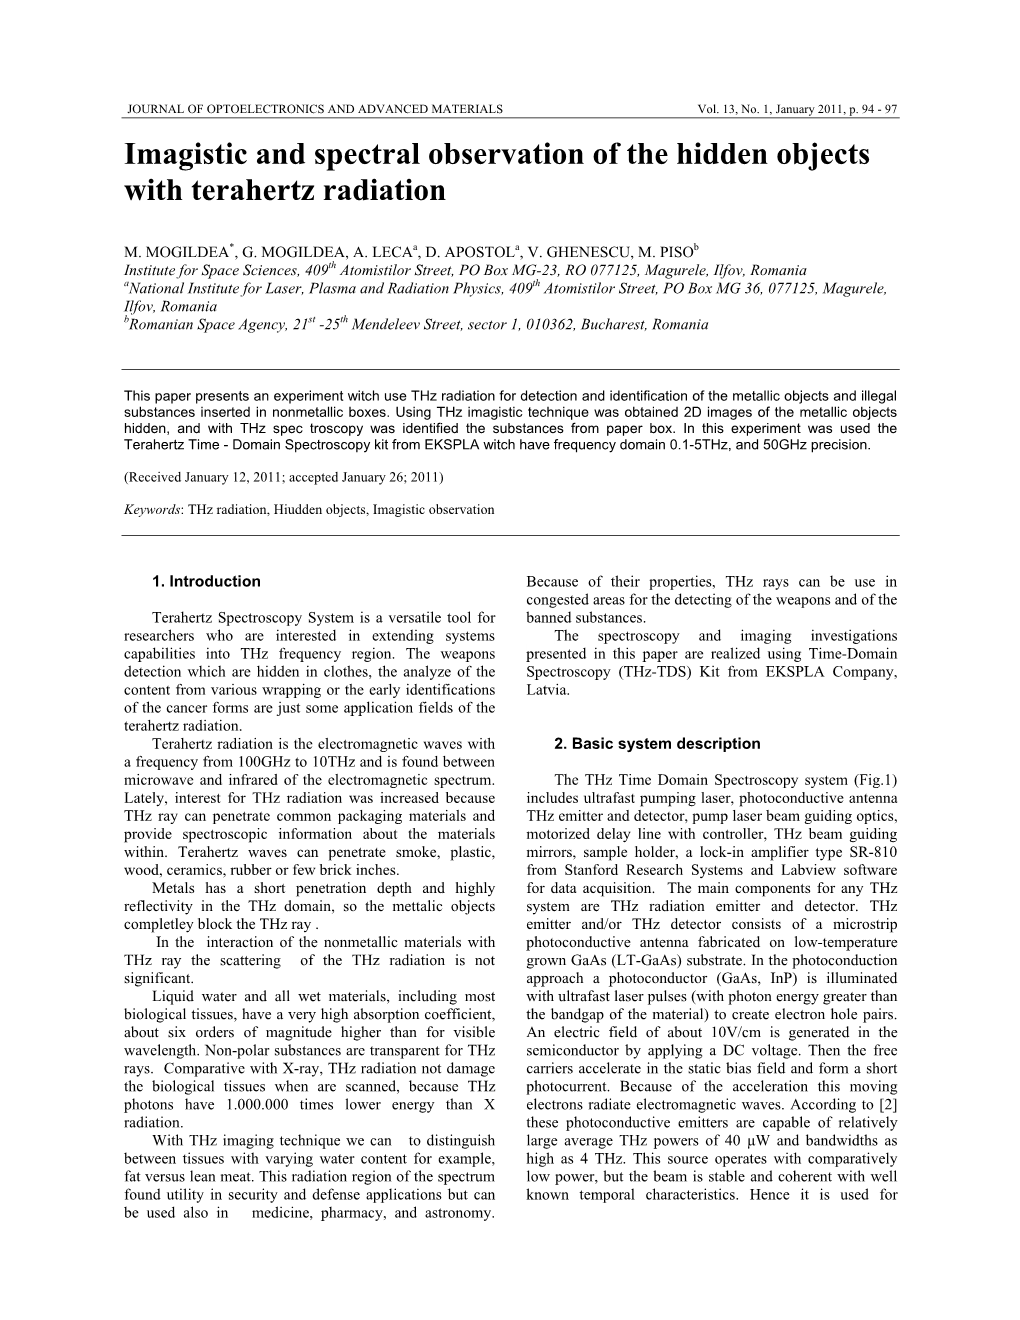 Imagistic and Spectral Observation of the Hidden Objects with Terahertz Radiation